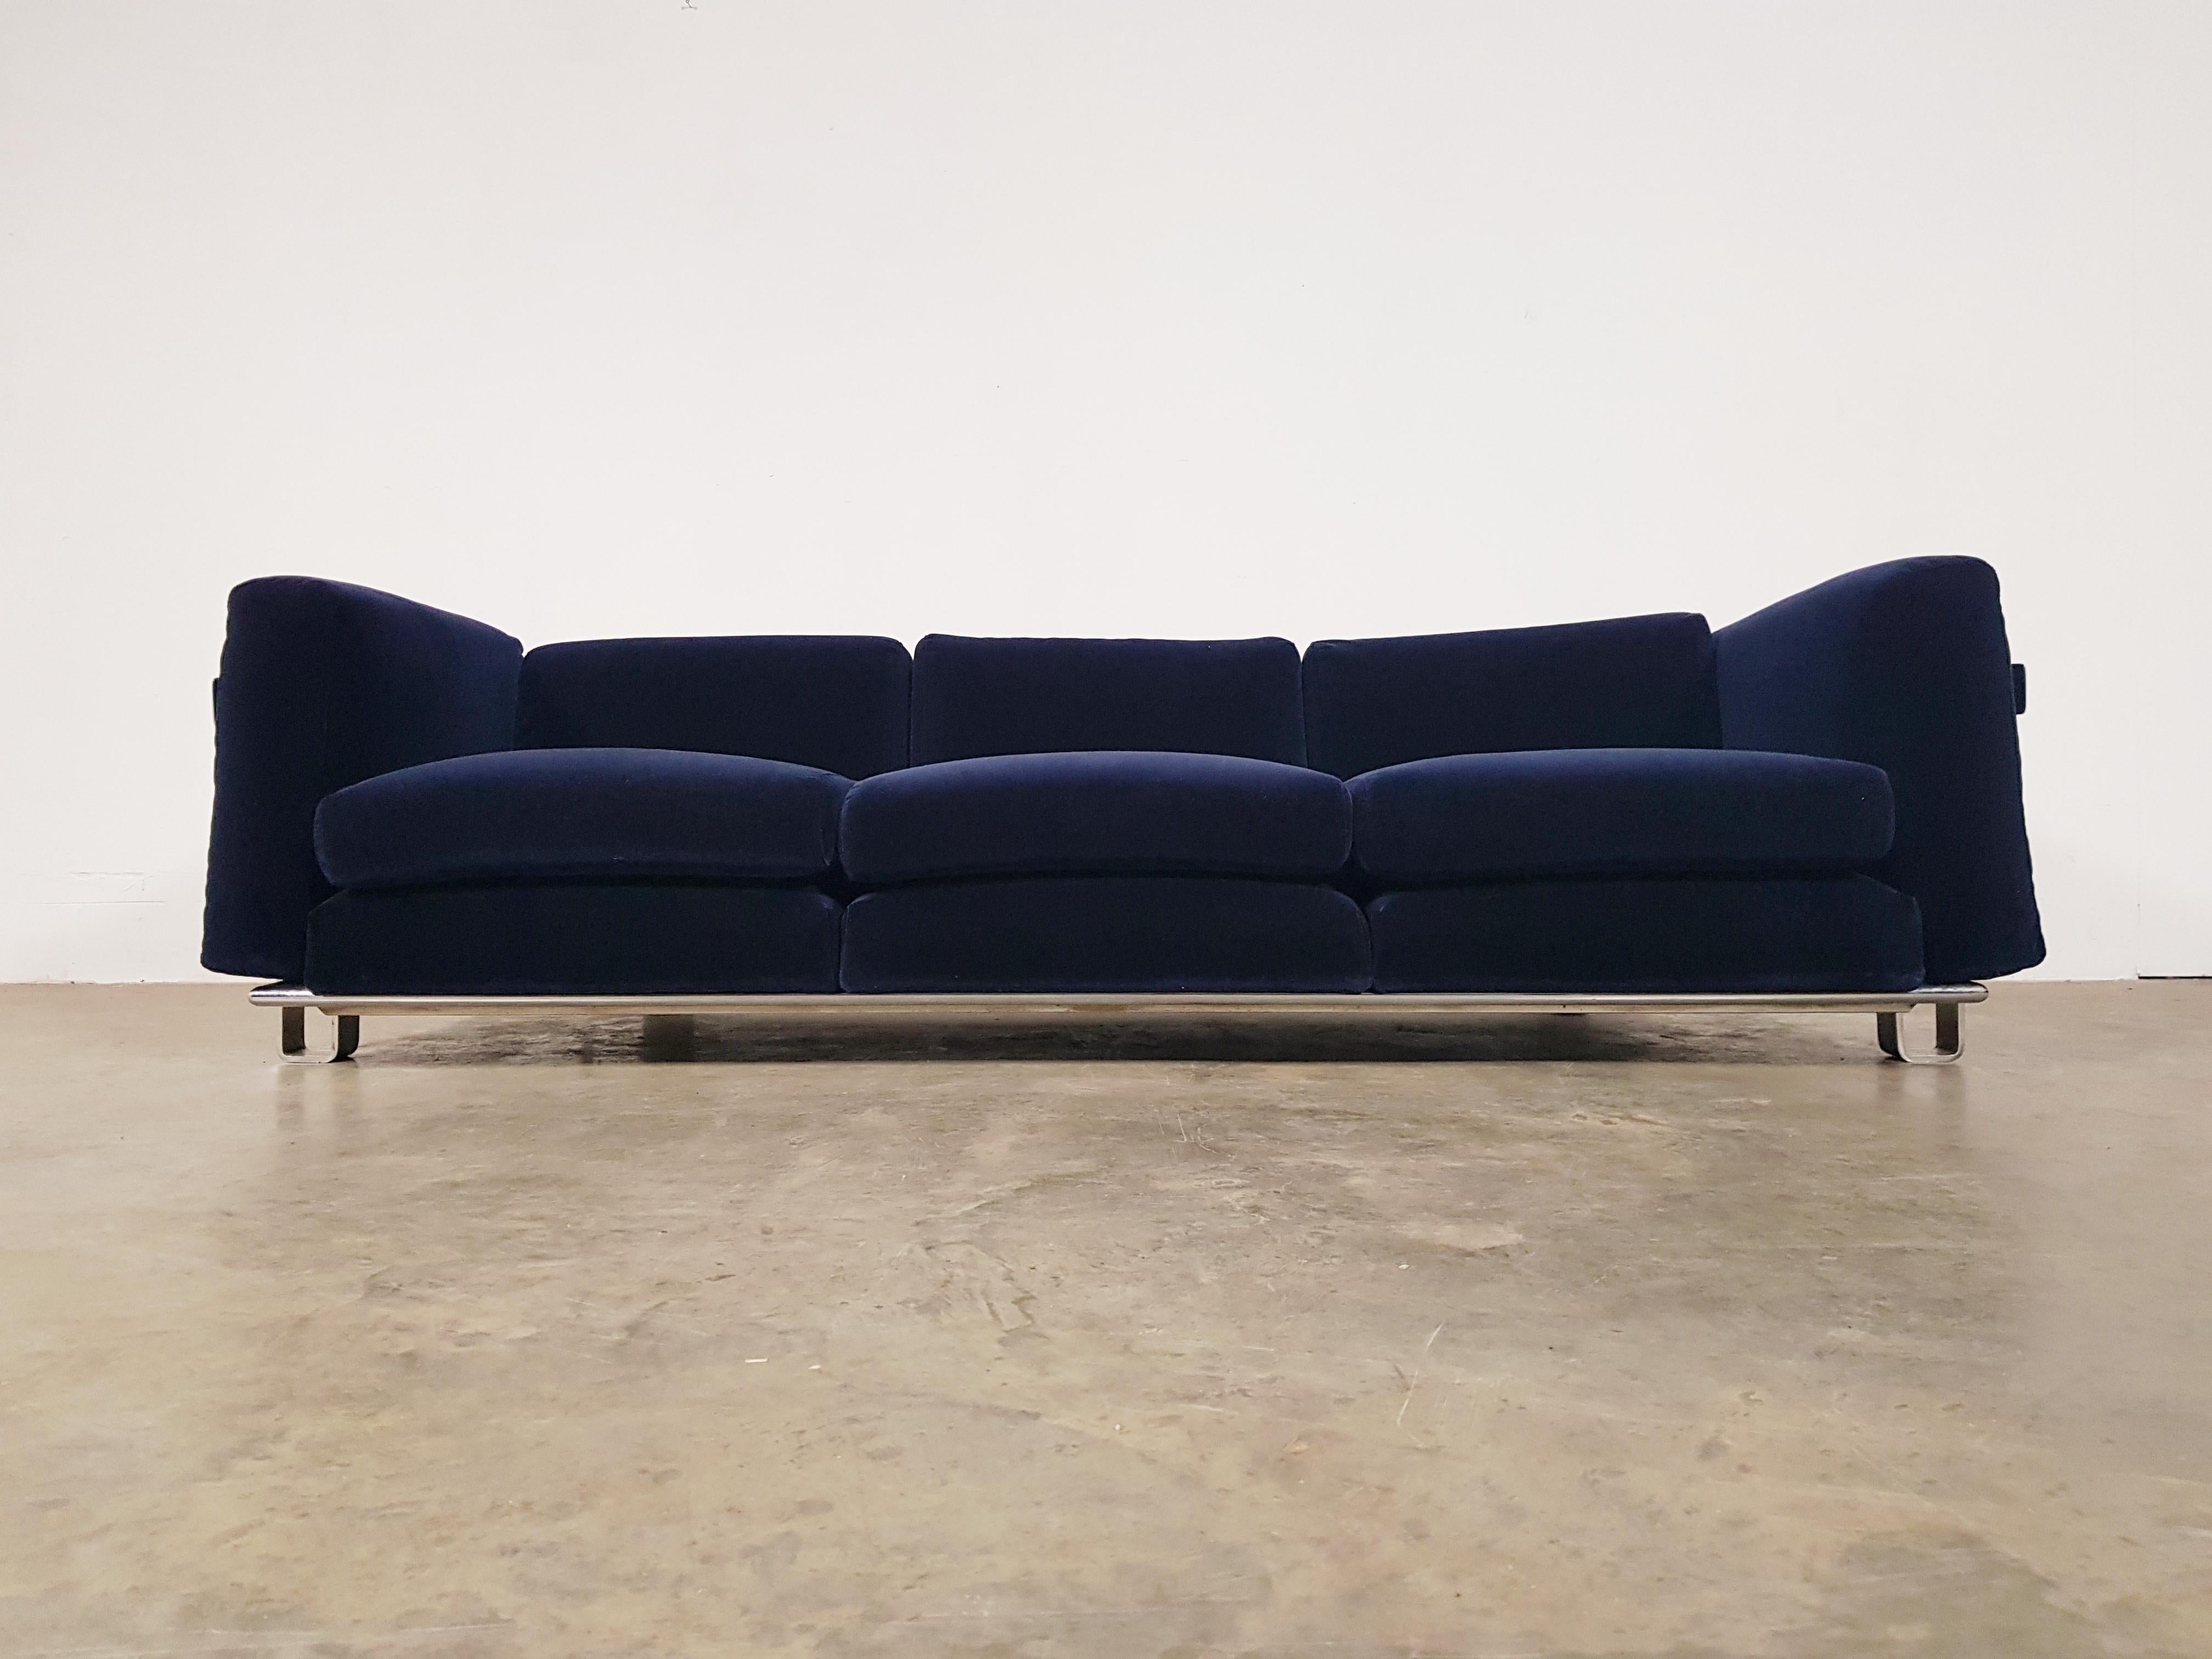 Luigi Caccia Dominioni sofa, Azucena, Italy, 1960s.

royal blue velvet reupholstery
The chrome is in a fantastic condition. 

We have two more 3-seat sofas available. Our in house expert upholstery service can accommodate your wishes.

   